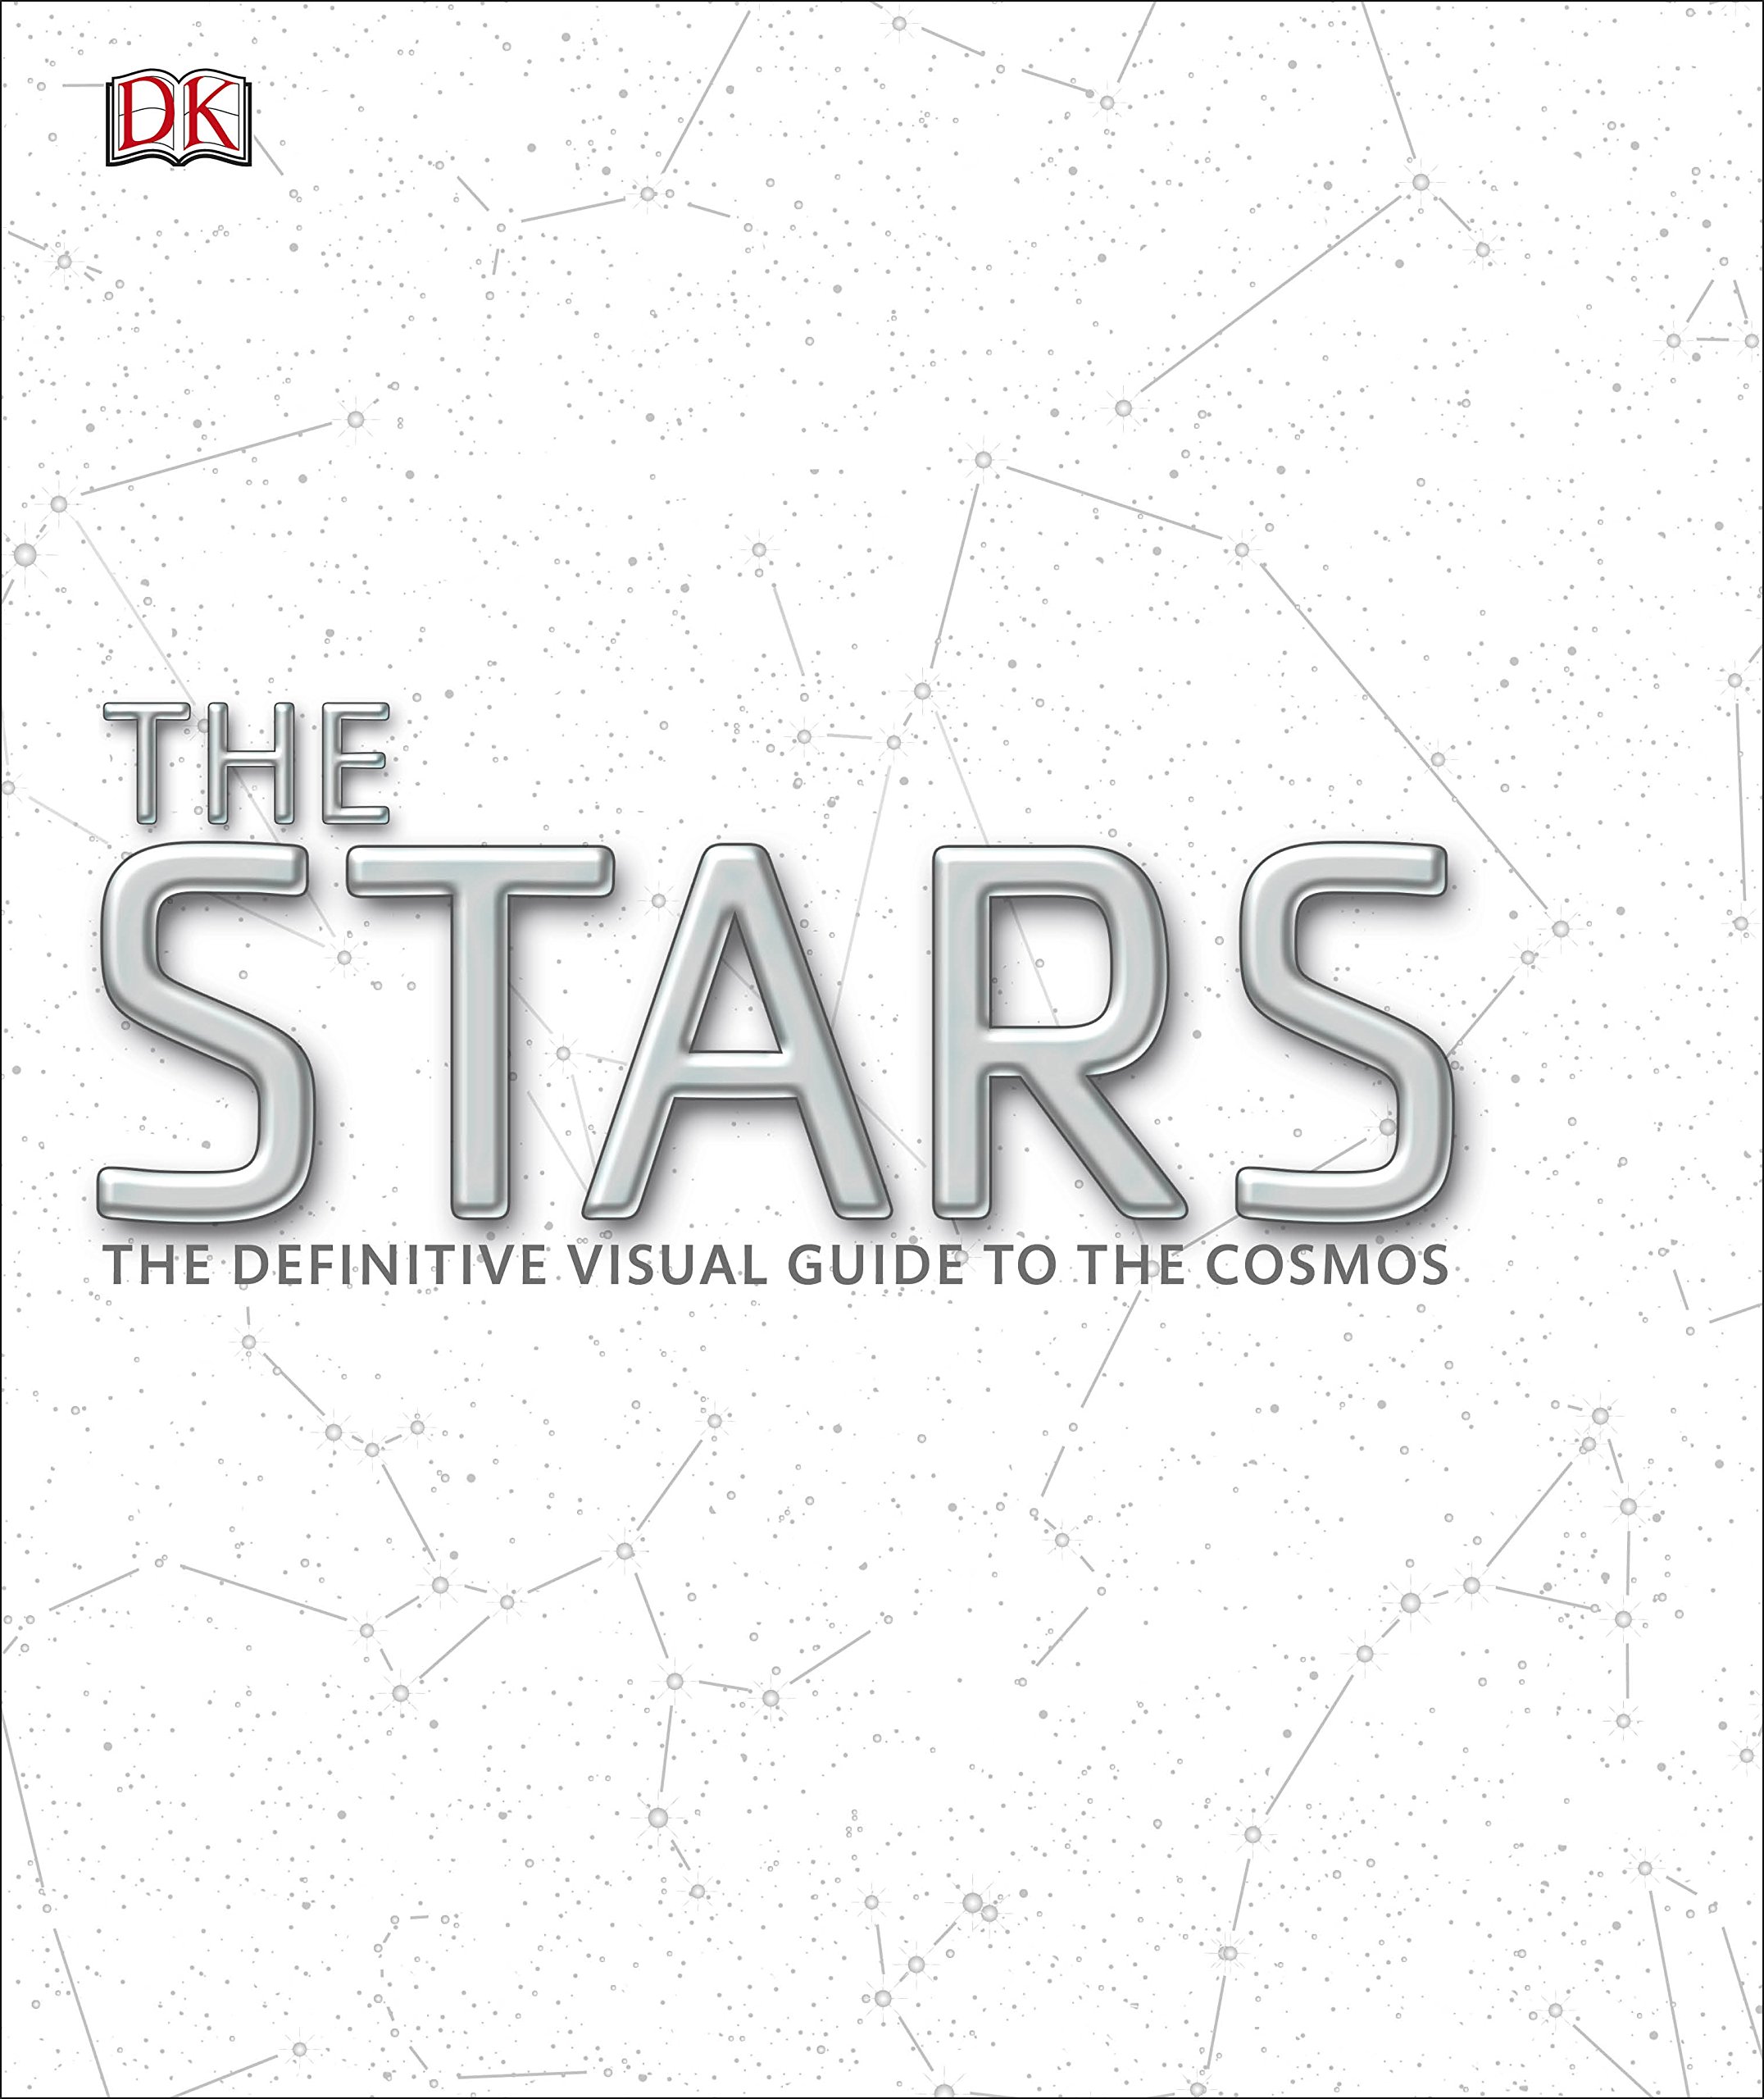 The stars :  the definitive visual guide to the cosmos